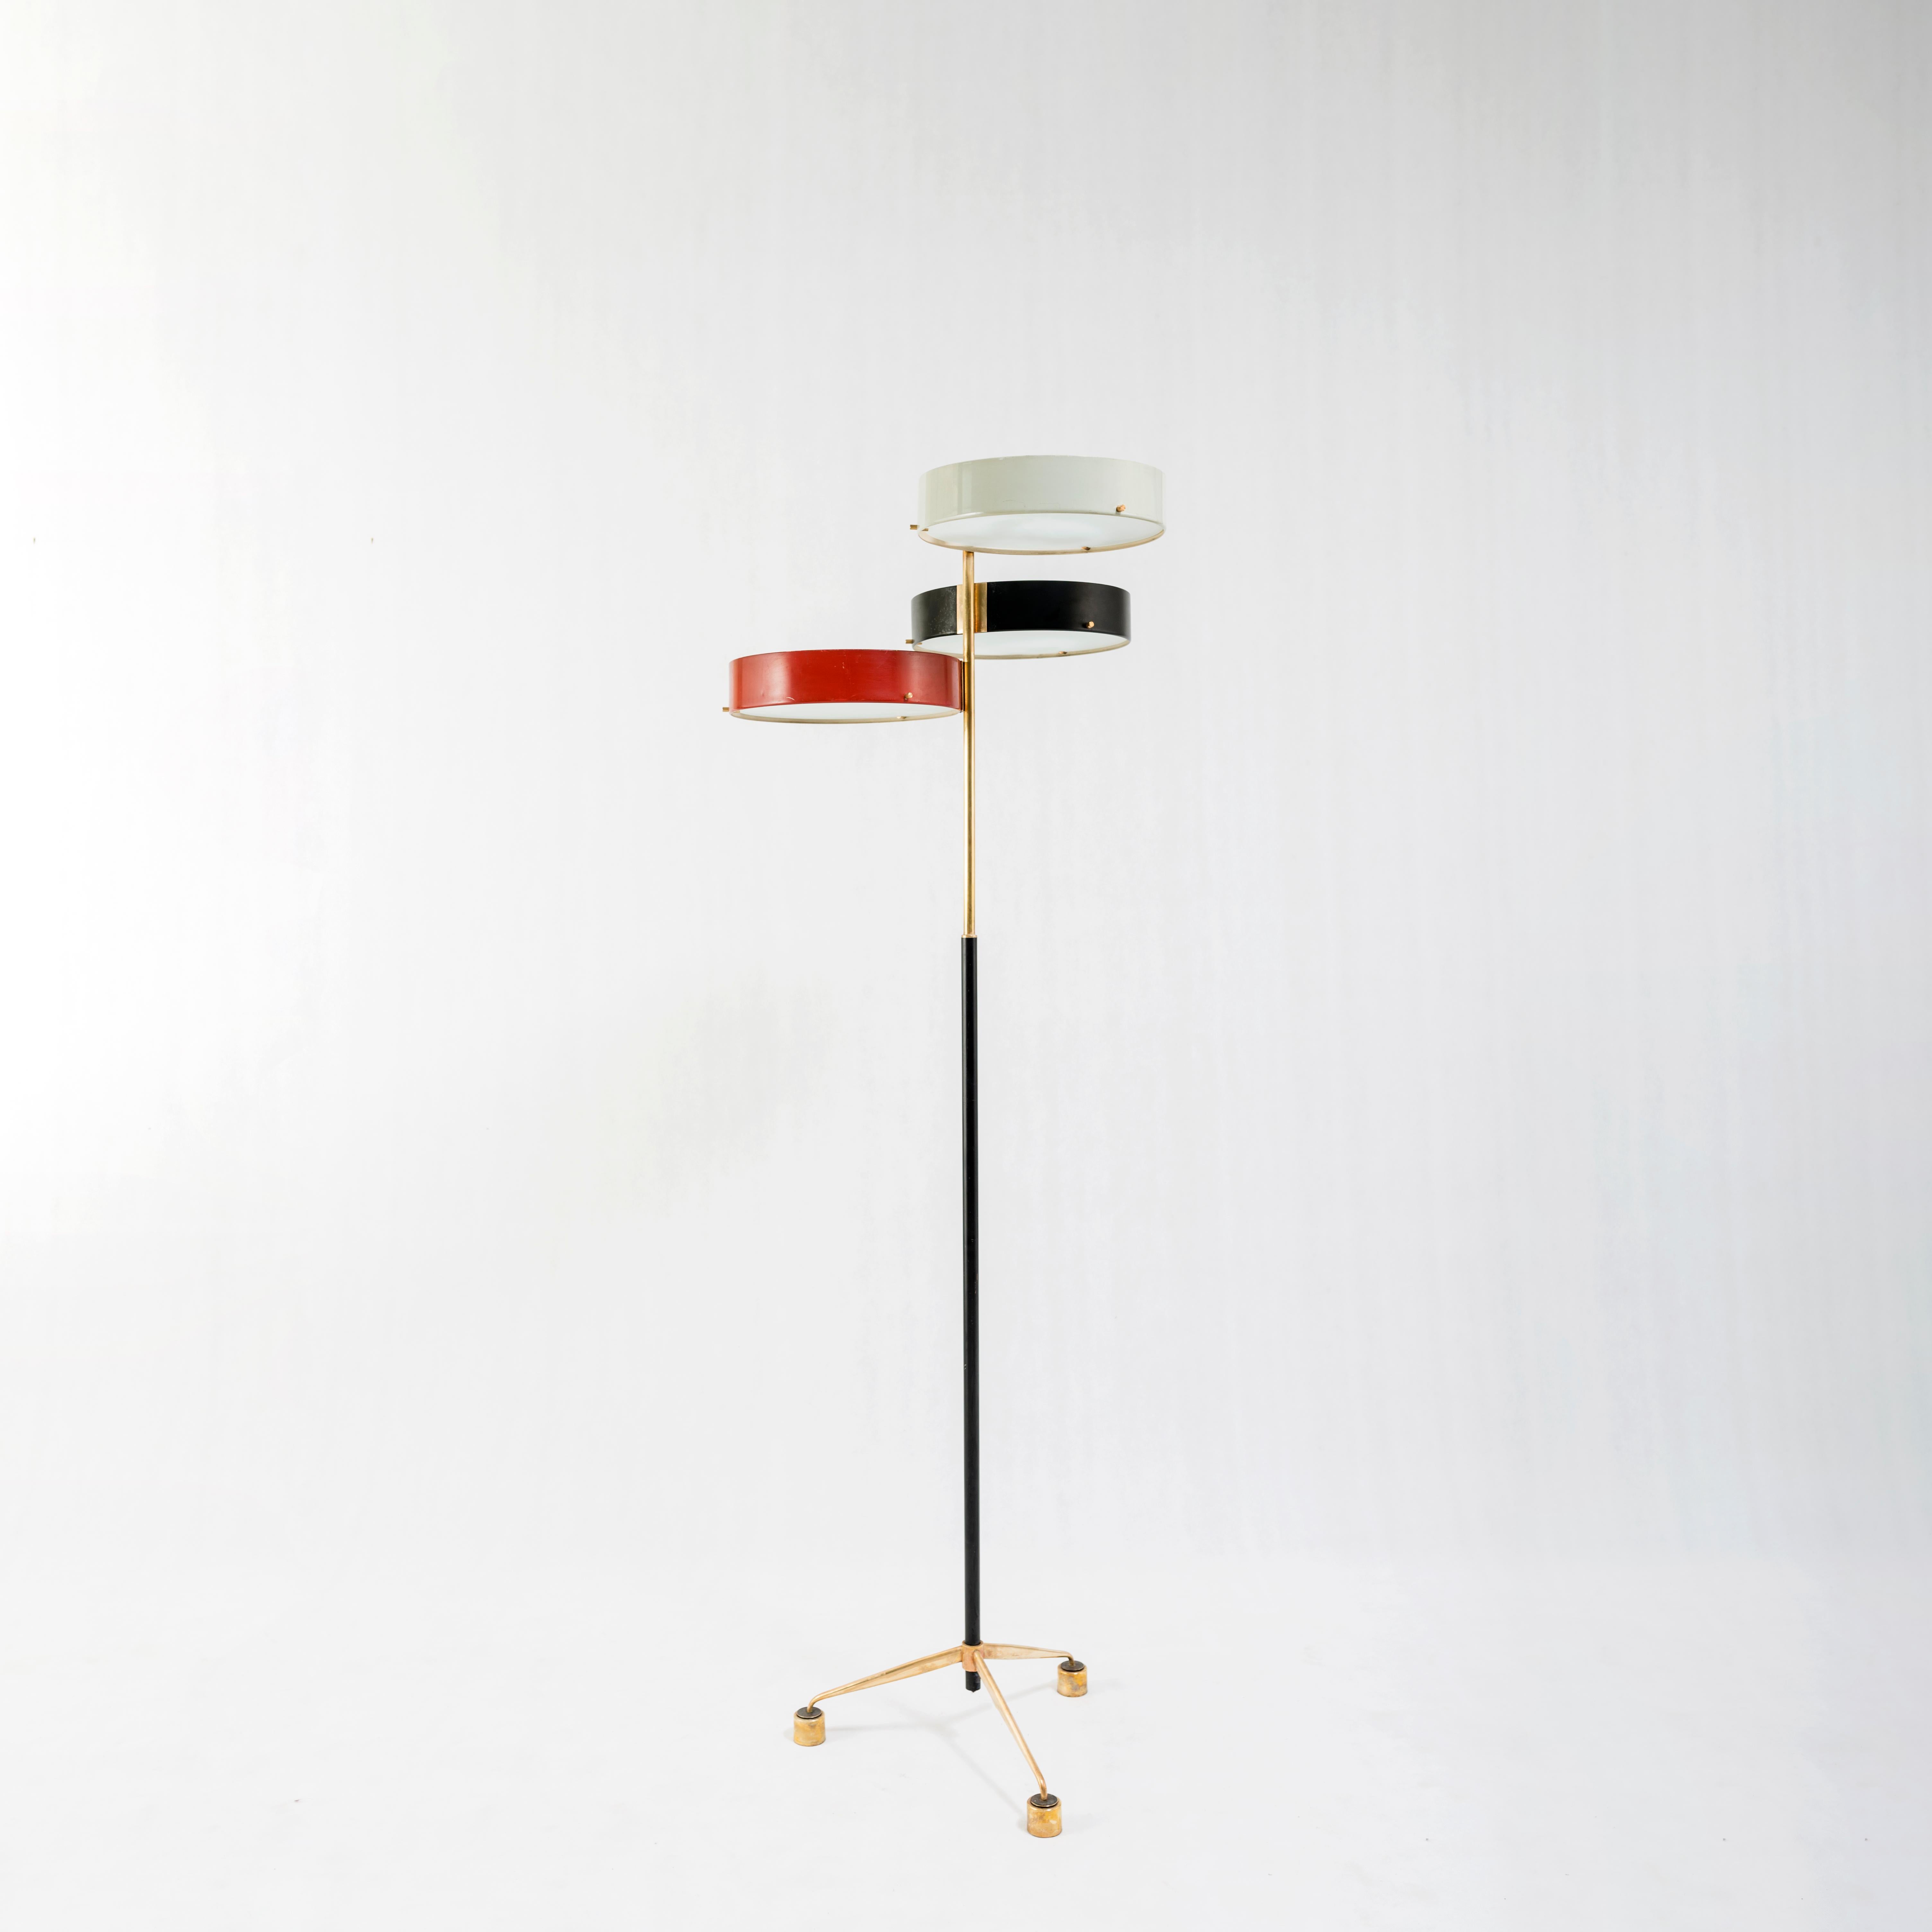 The Bruno Gatta floor lamp stands as a rare and unique piece within the realm of mid-20th century lighting design, showcasing the innovative spirit and artistic vision of its creator. Crafted with meticulous attention to detail and imbued with a